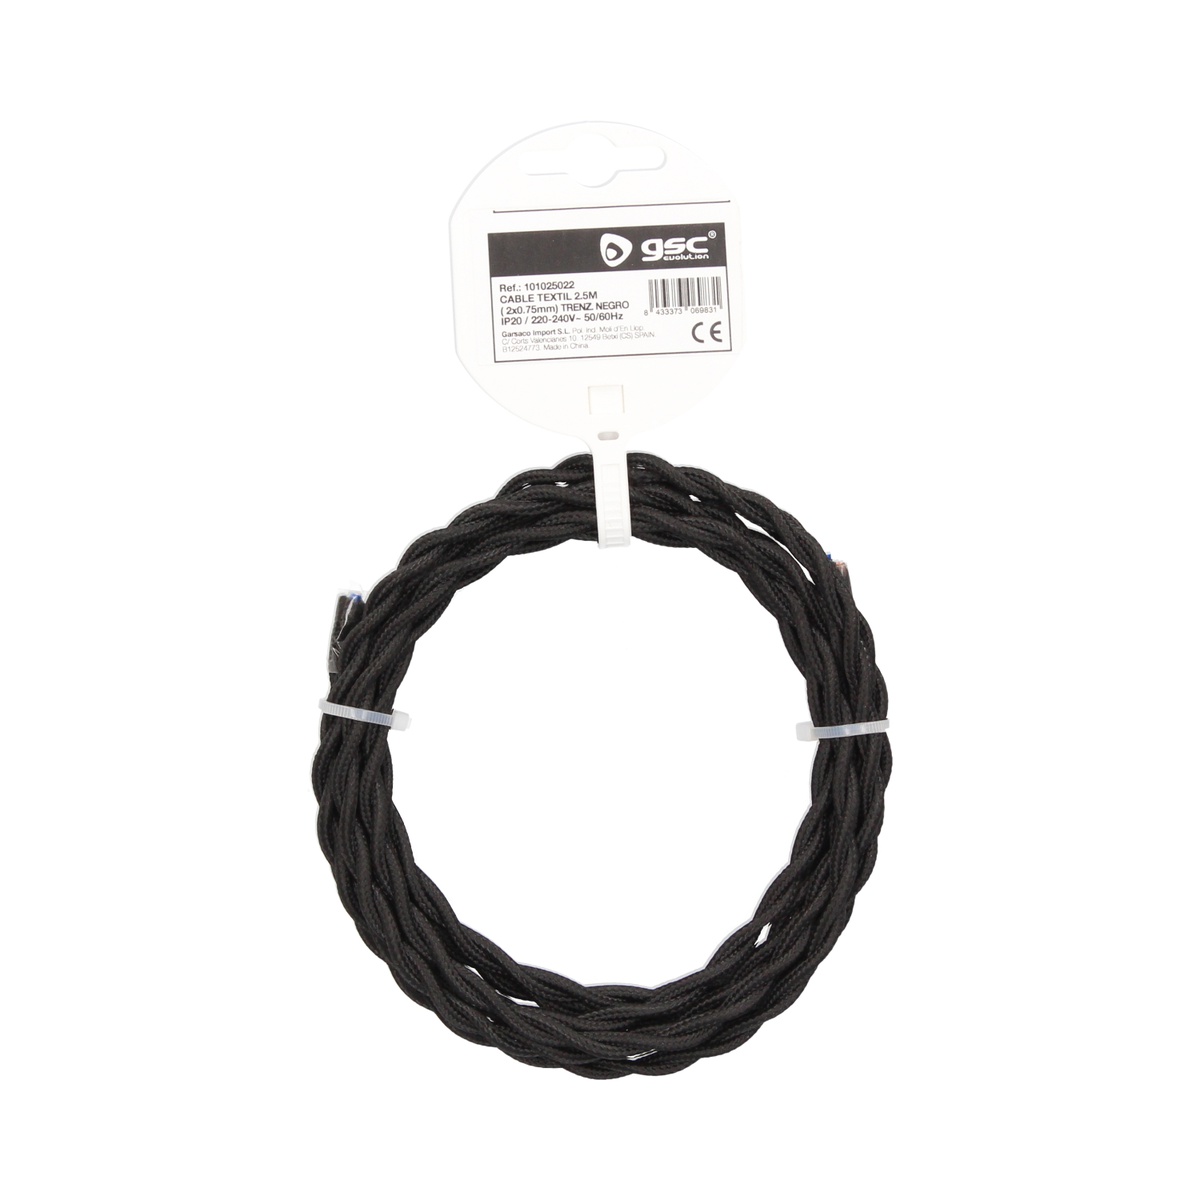 2.5m textile cable (2x0.75mm) Black braided